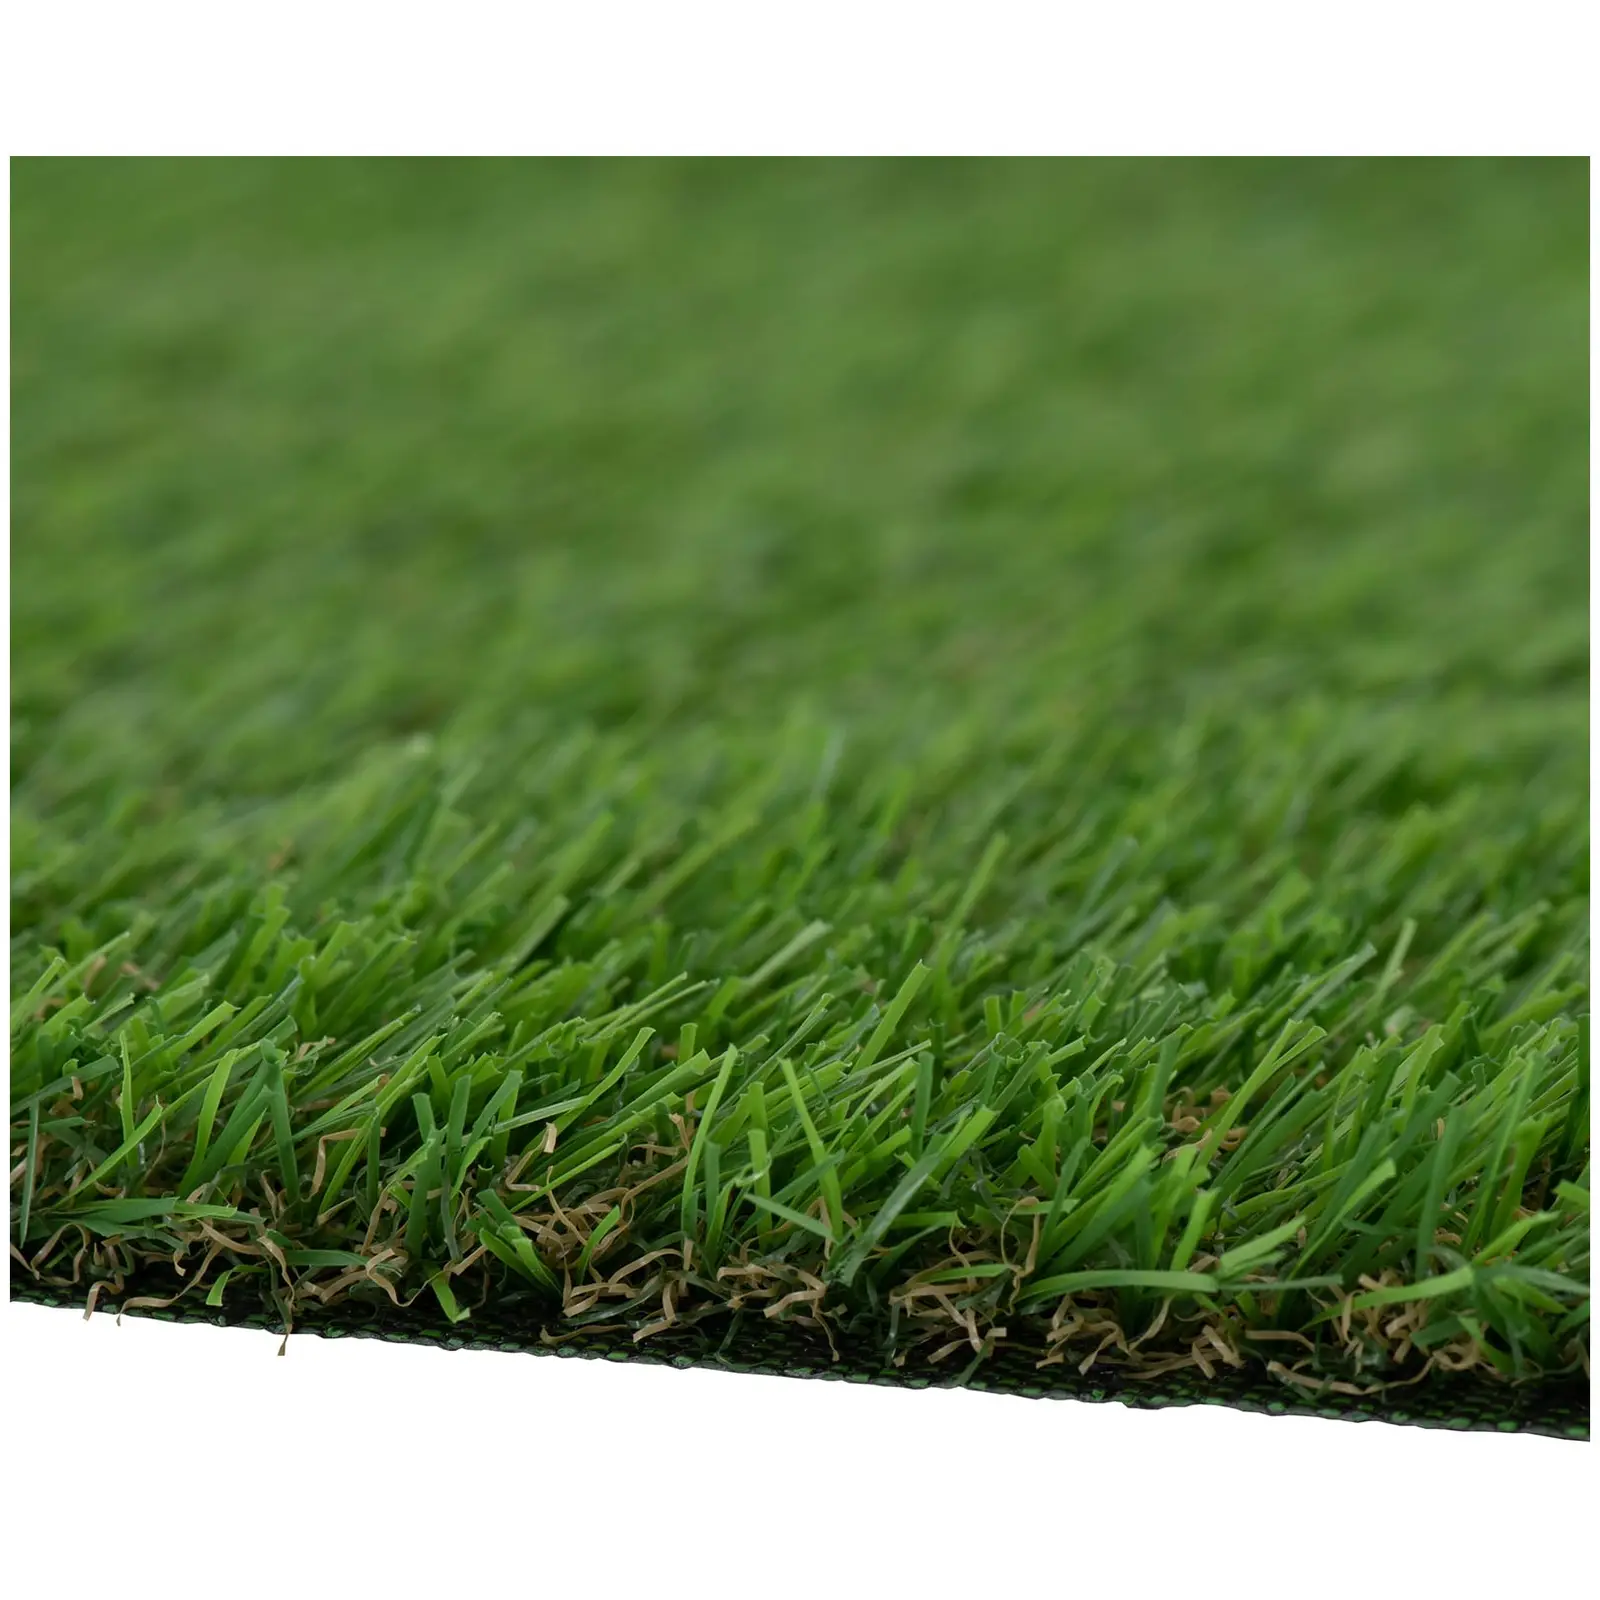 Artificial grass - 200 x 1000 cm - Height: 20 mm - Stitch rate: 13/10 cm - UV-resistant